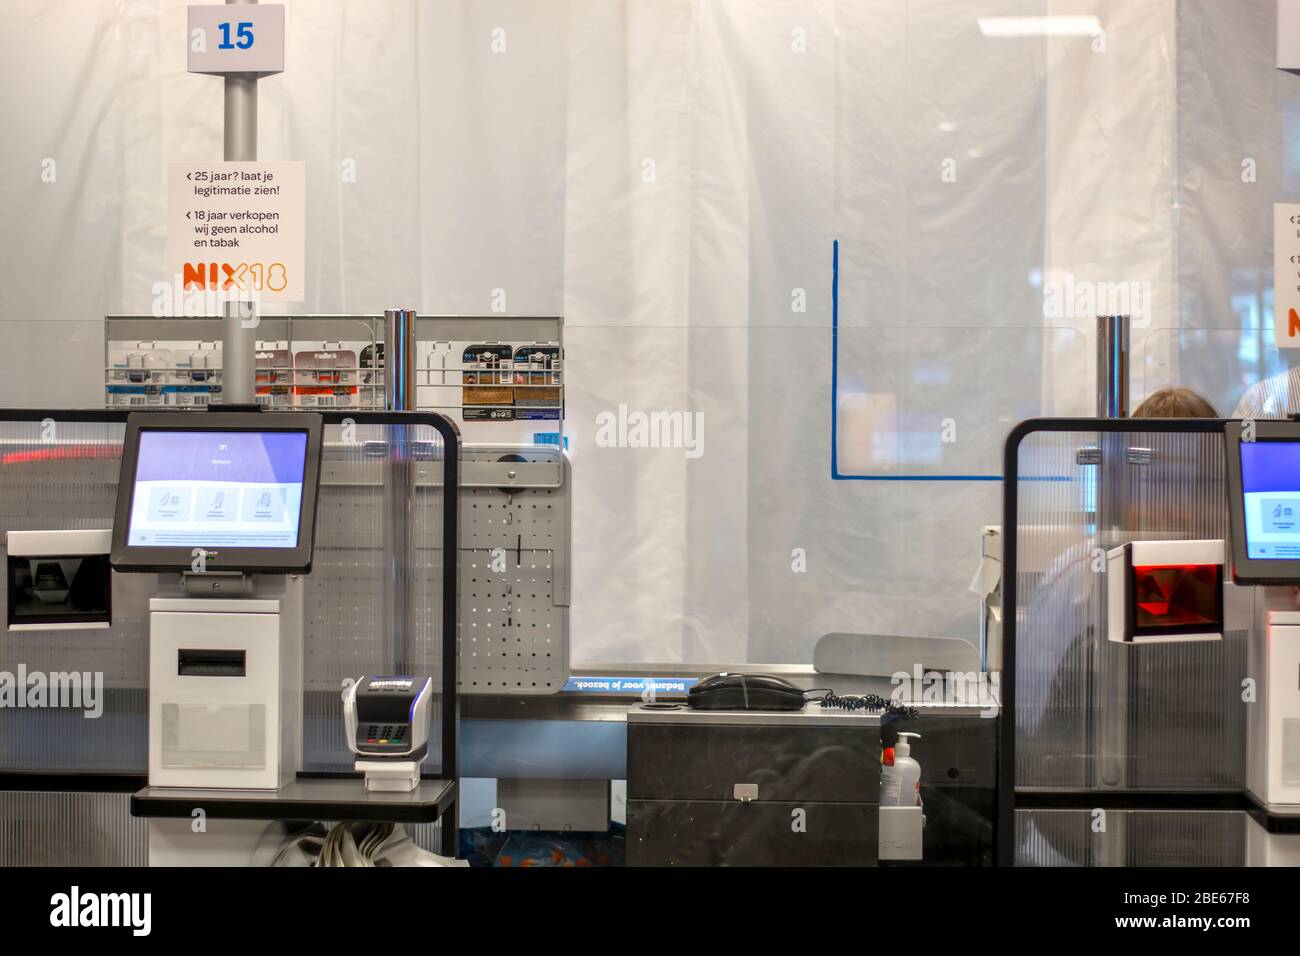 Protective plastic and plexiglass screen shields installed at the tills in supermarket to stop coronavirus spread. Cash desks with protective shields Stock Photo